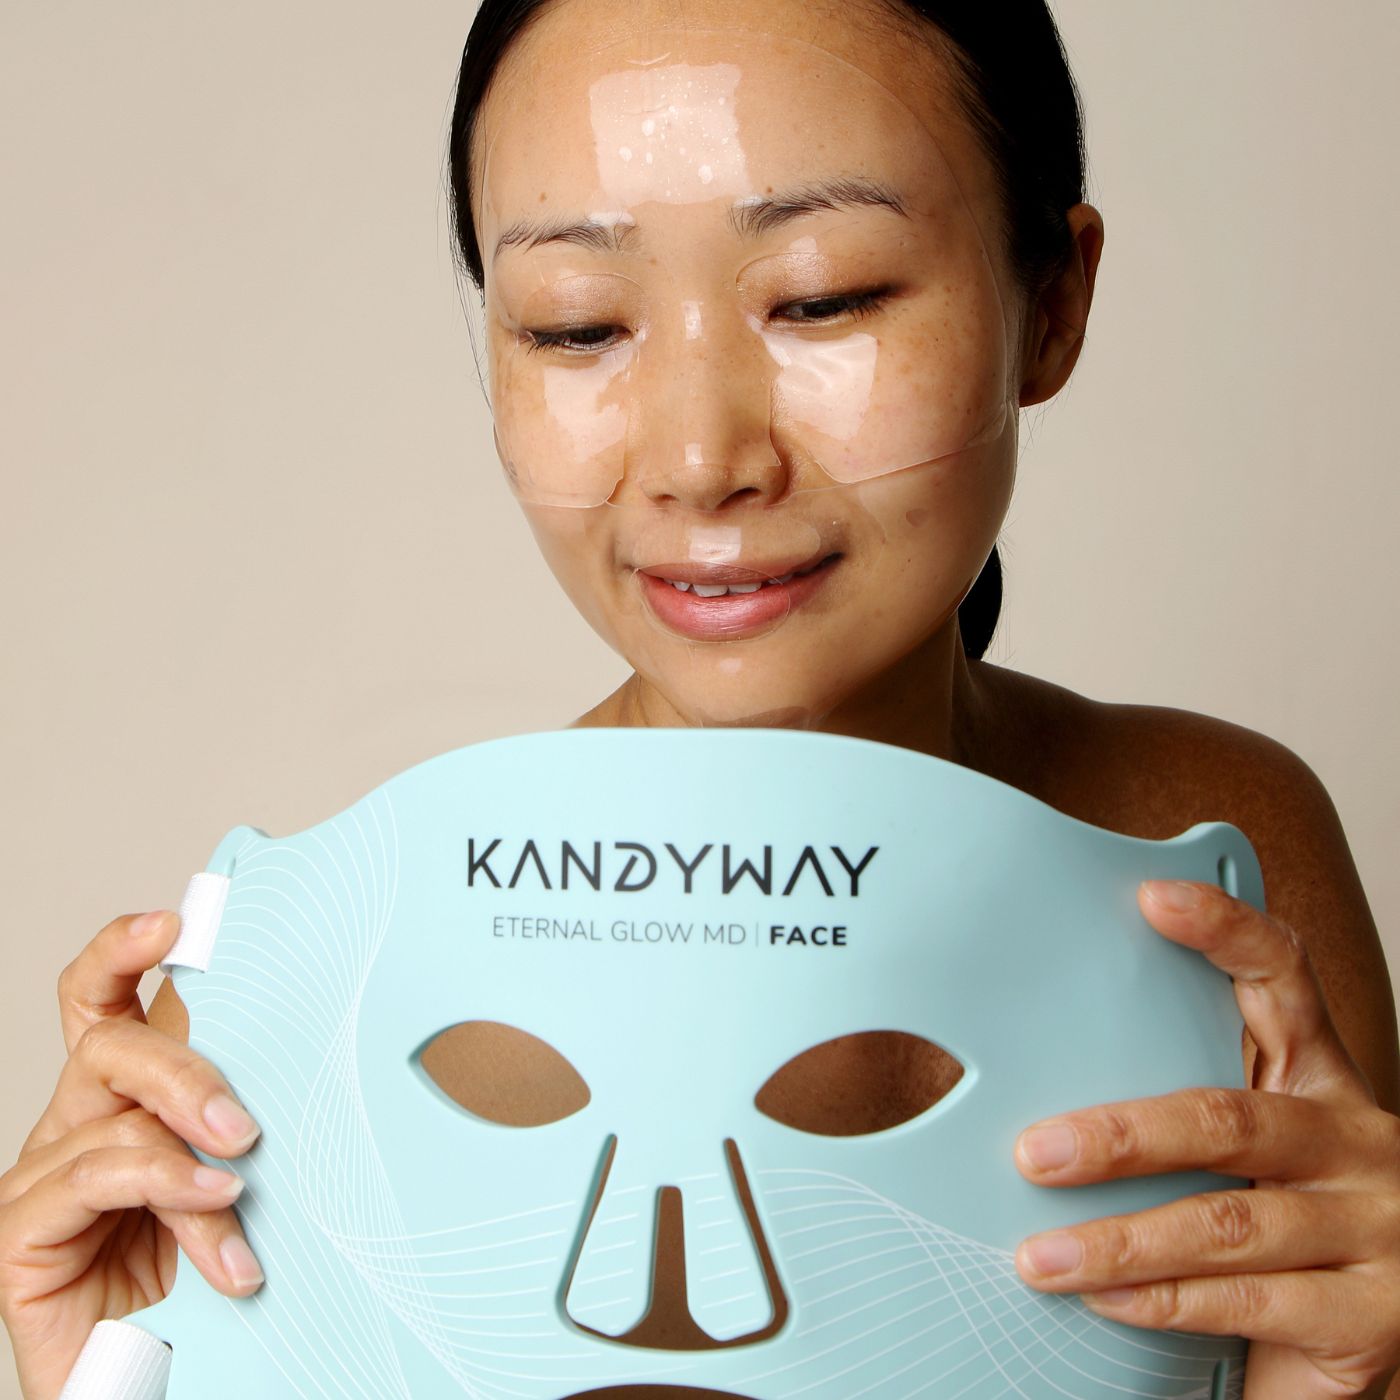 Kandyway Eternal Glow Led Light Therapy is as easy as 1,2,3